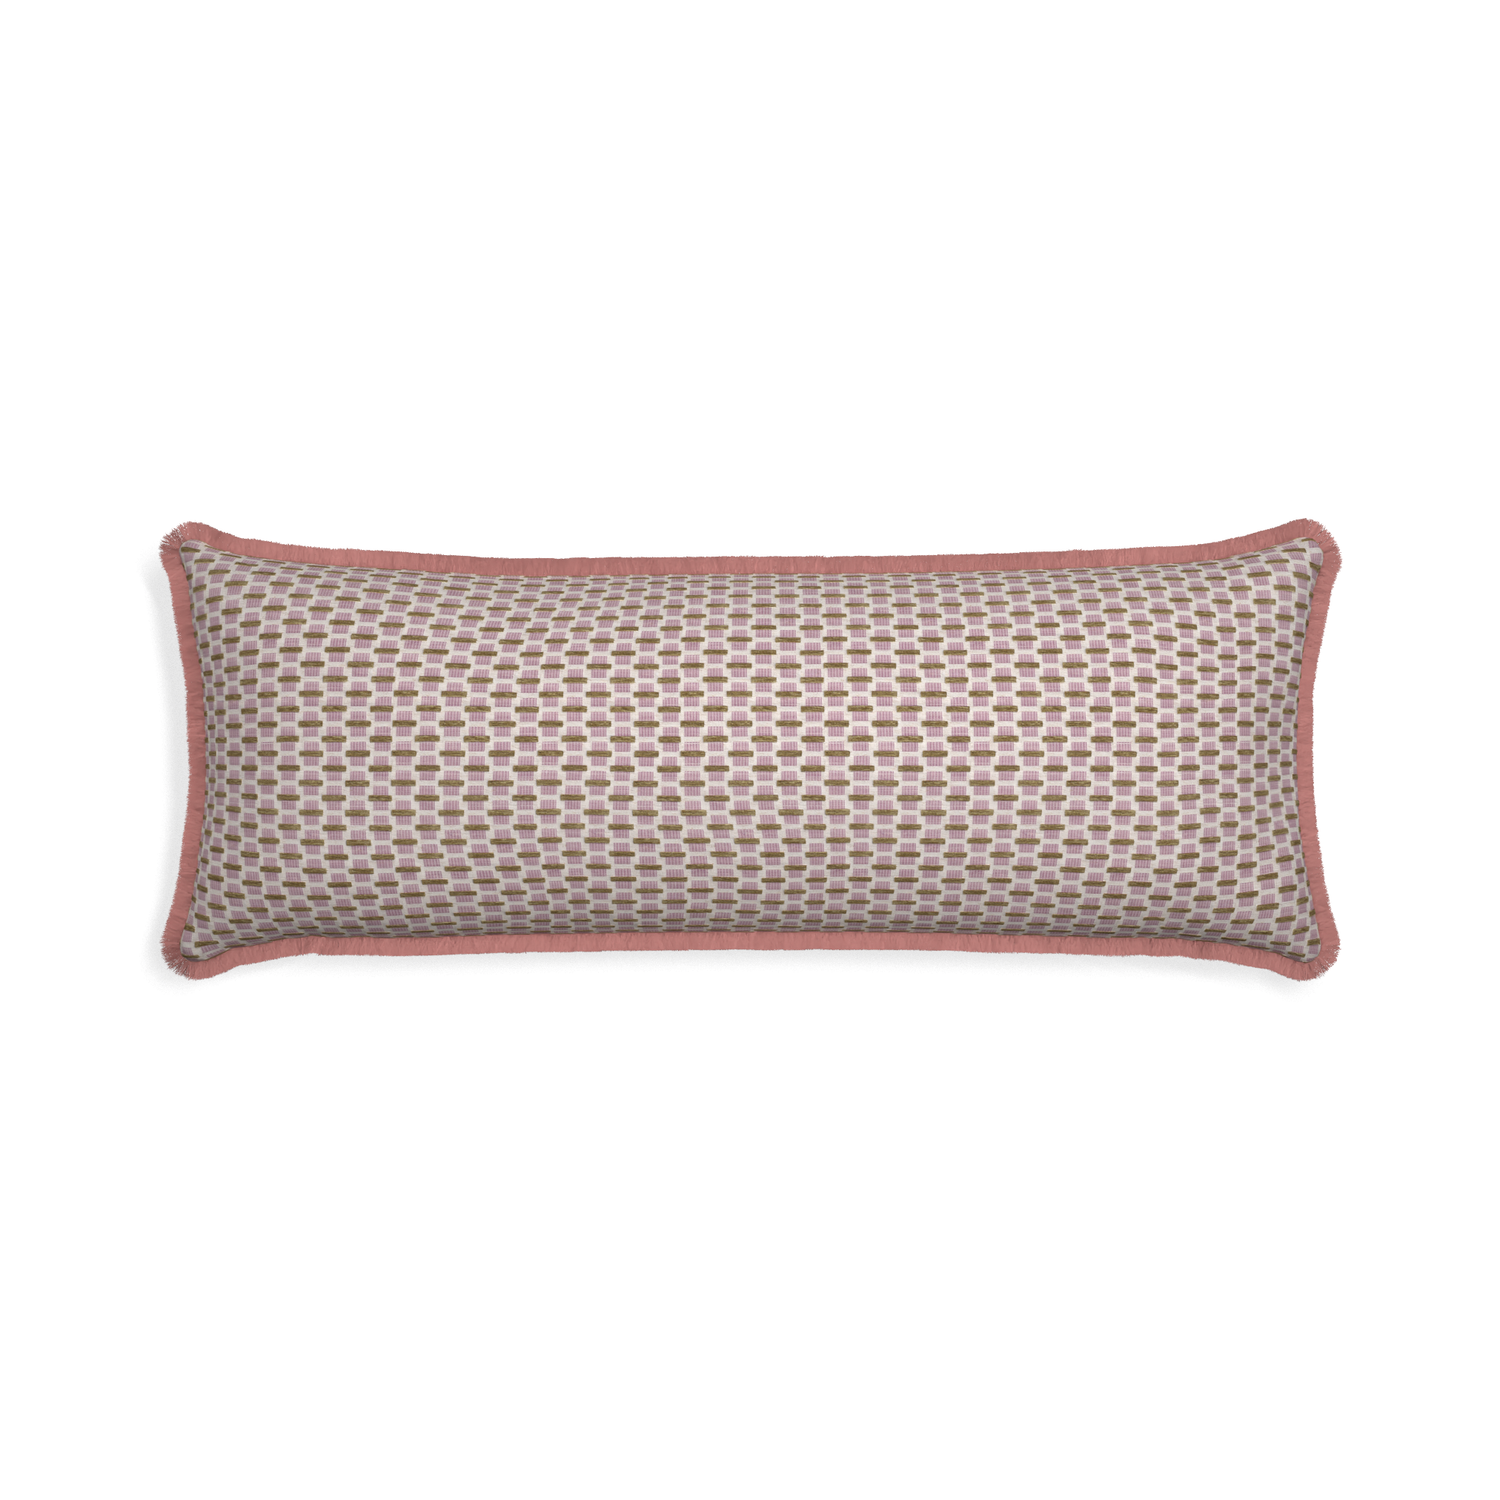 Xl-lumbar willow orchid custom pink geometric chenillepillow with d fringe on white background